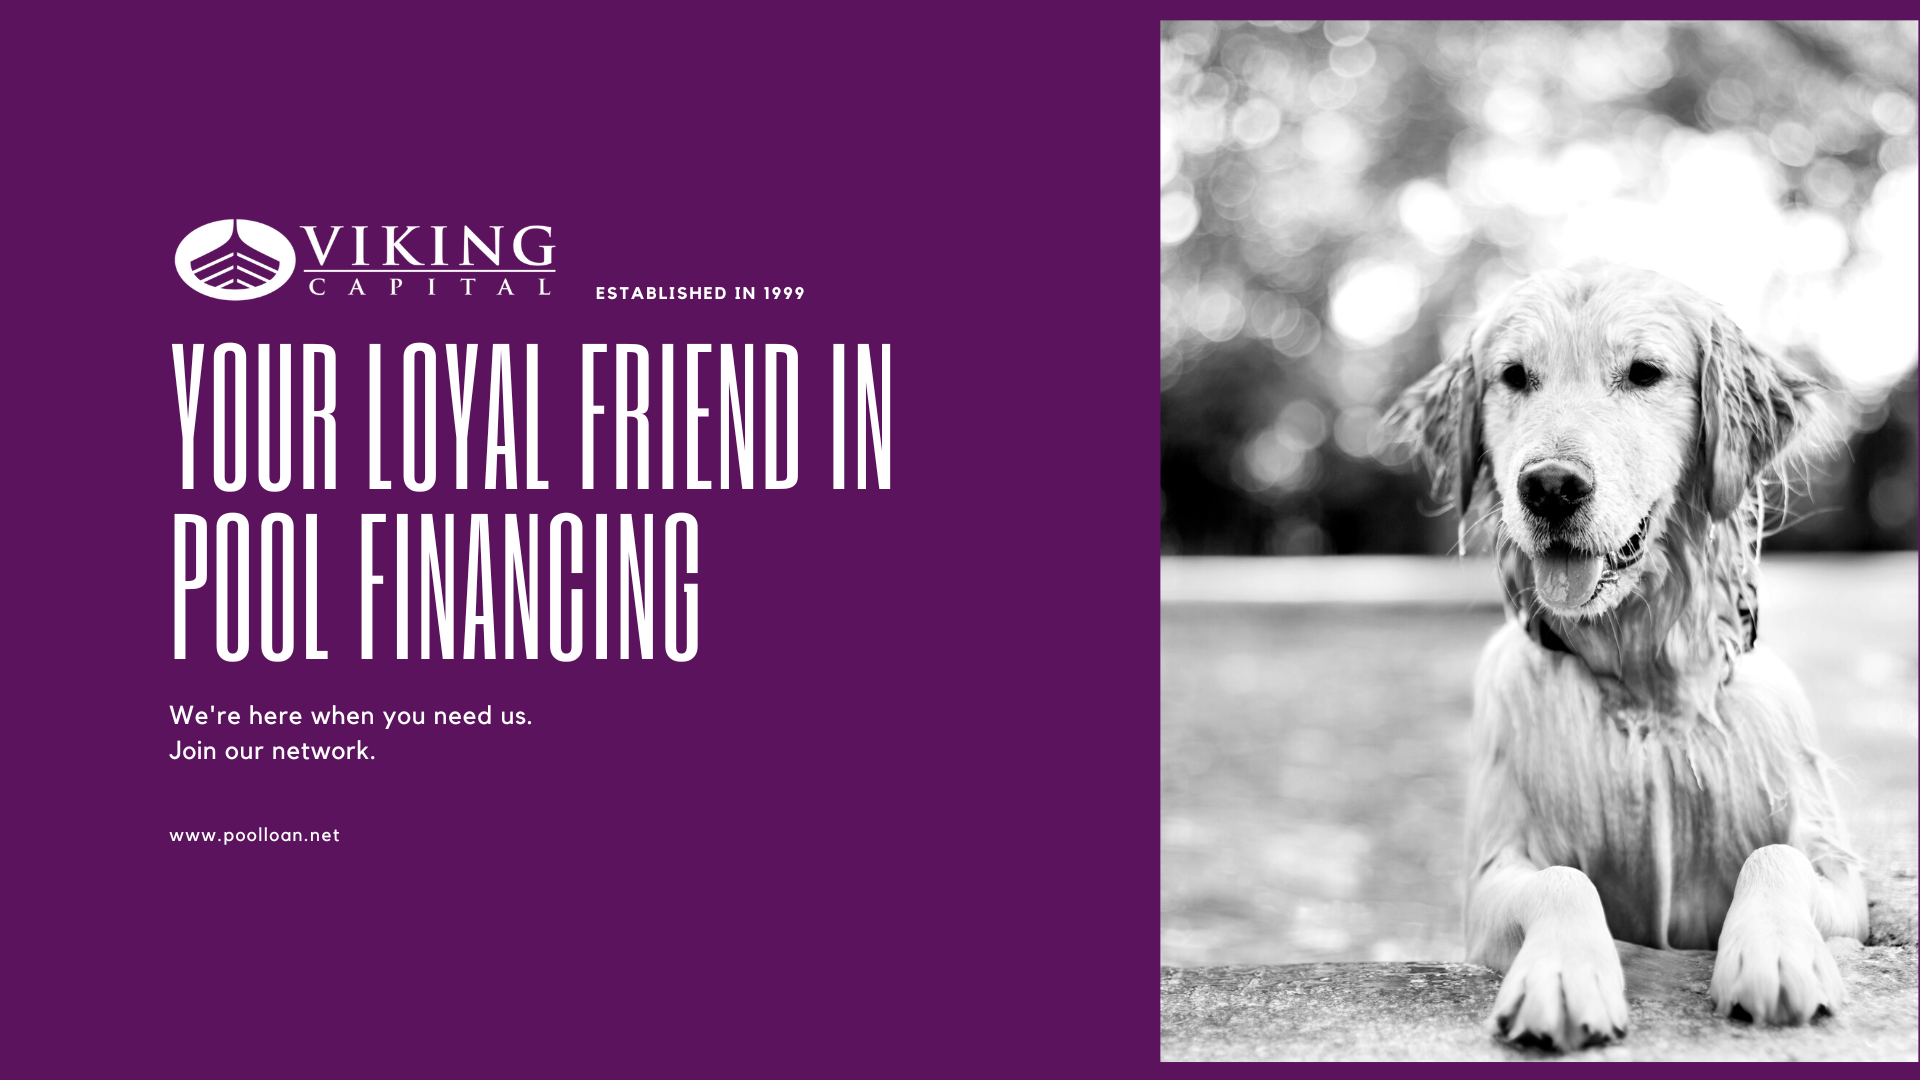 Your Loyal Friend in Pool Financing web page background 1920 × 1080 px)